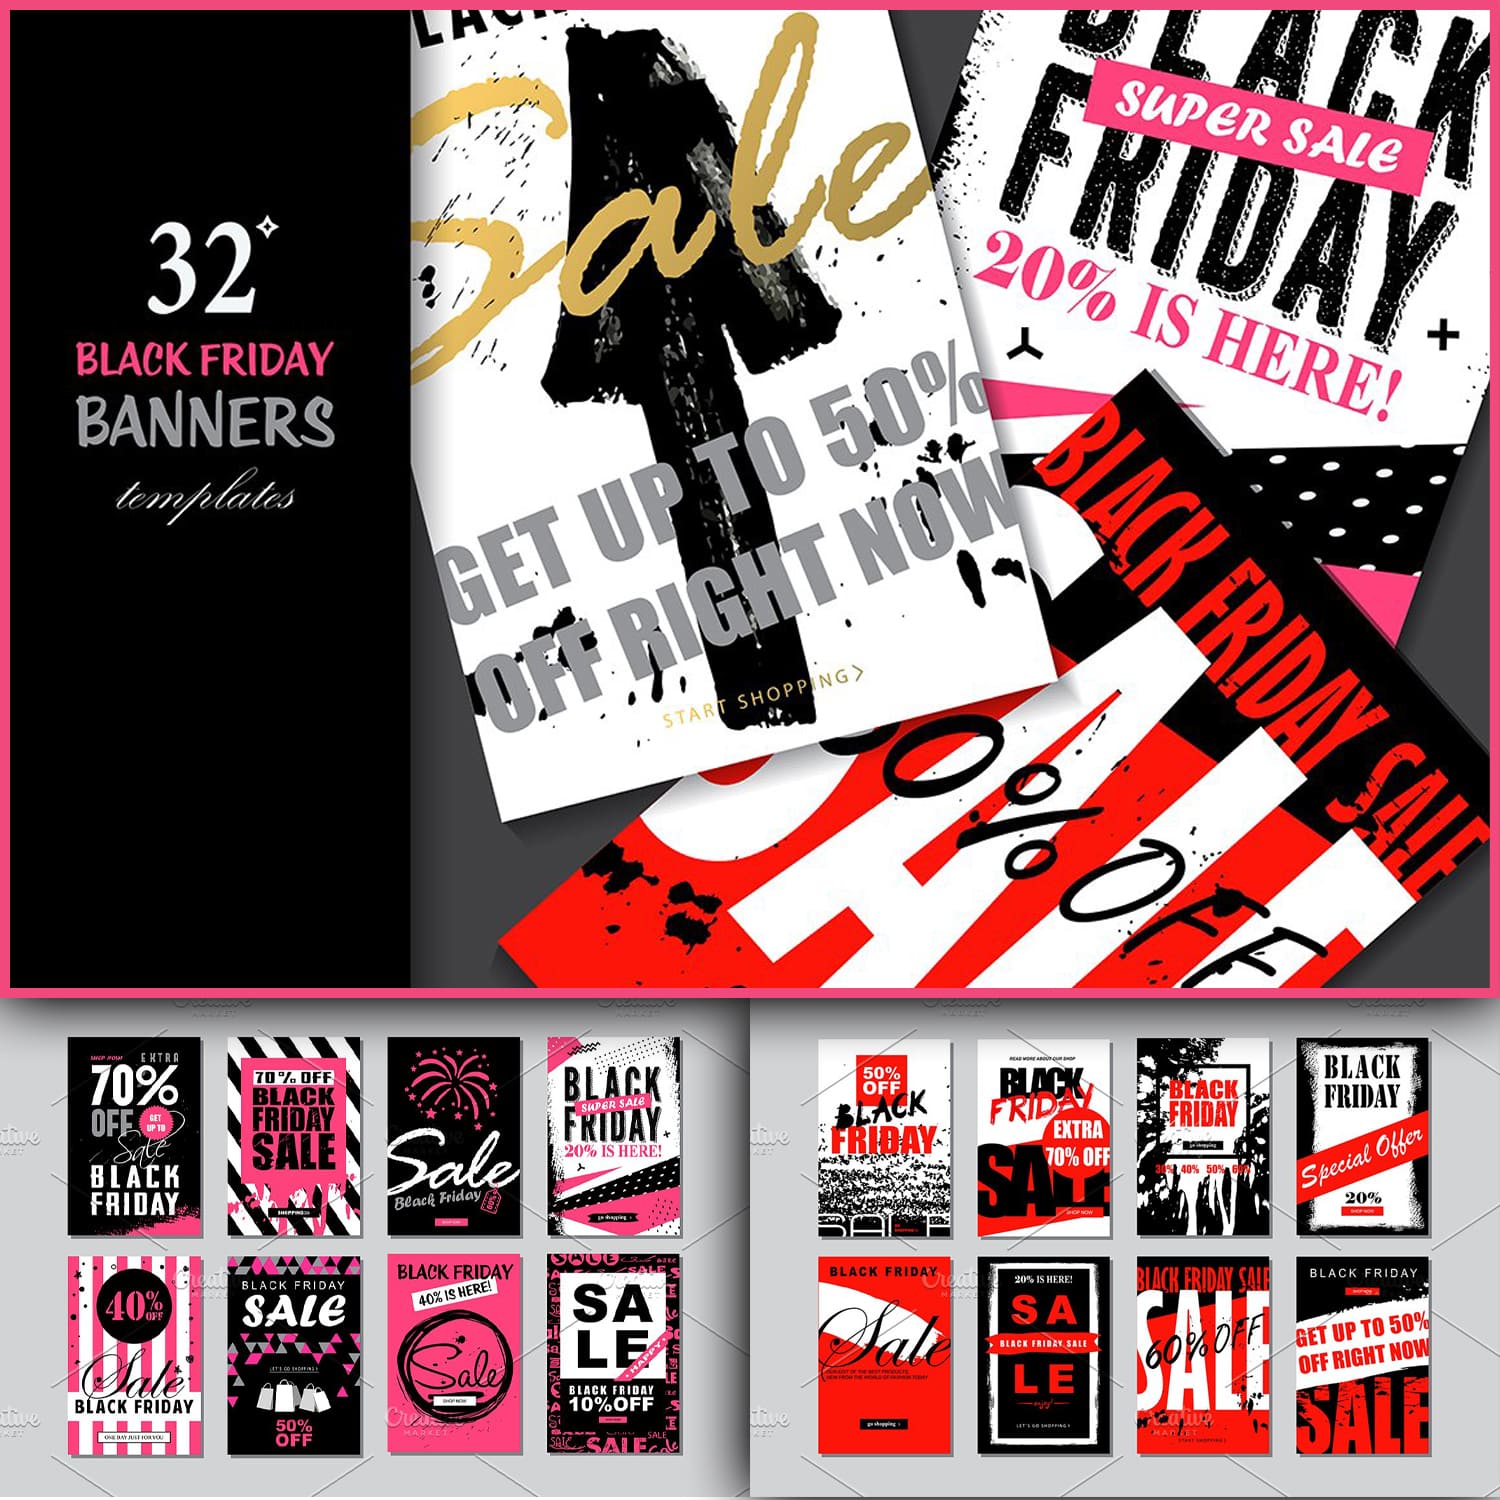 Black Friday Banners Templates.